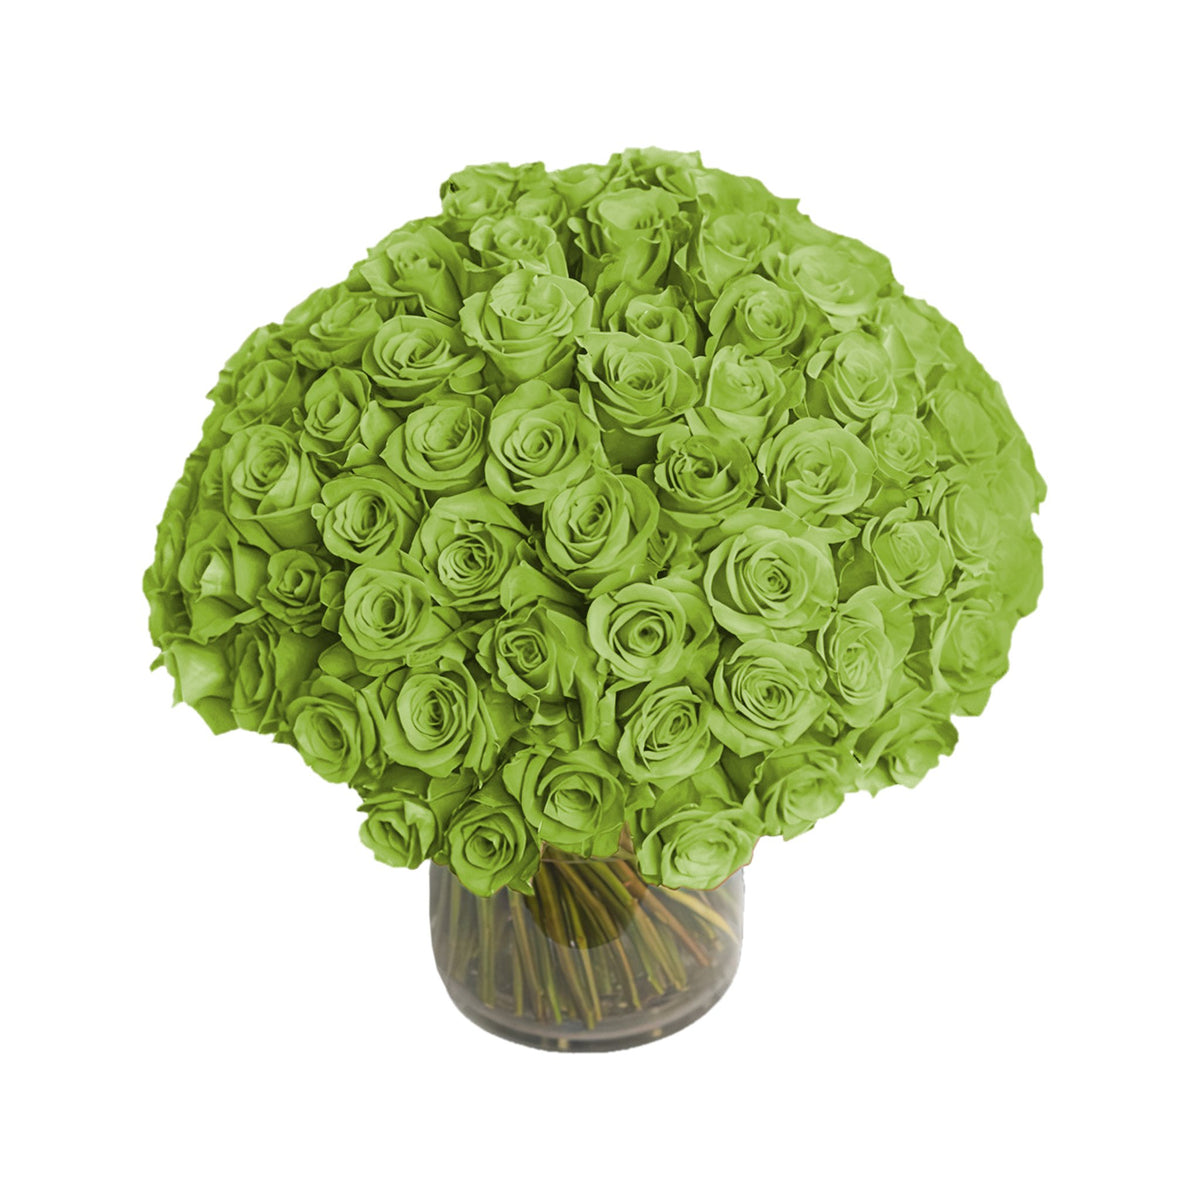 NYC Flower Delivery - Fresh Roses in a Crystal Vase | Green - 100 Roses - Roses